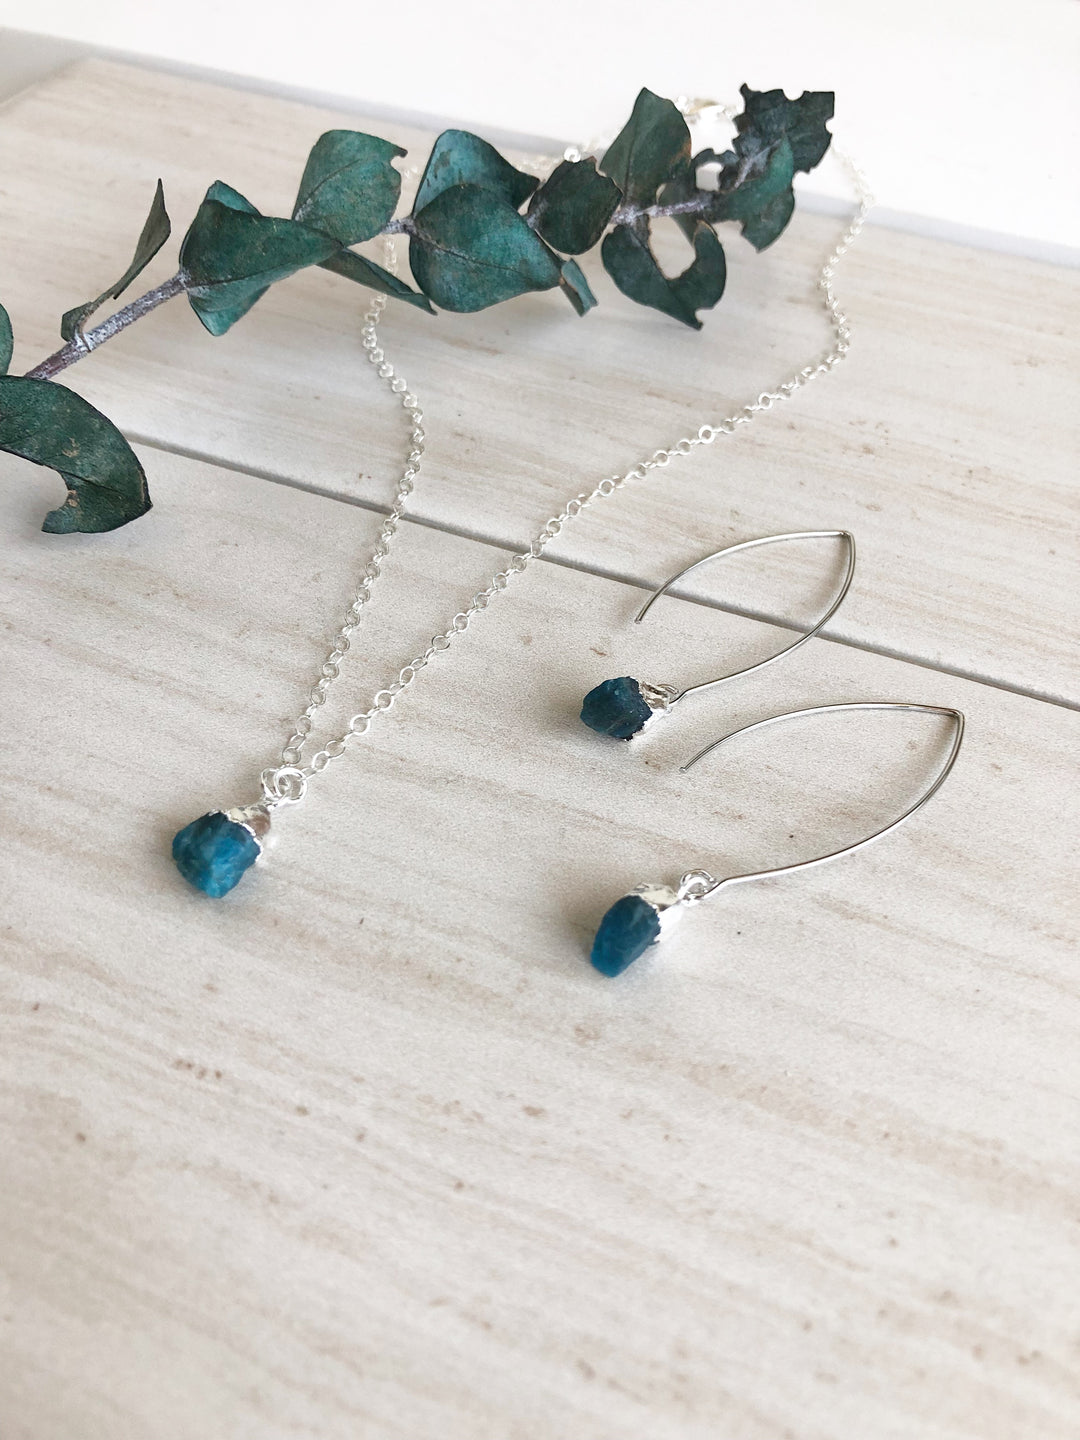 Dainty Tourmaline Set in Silver - Blue Teal Toned Tourmaline. Raw Stone Necklace and Earrings.